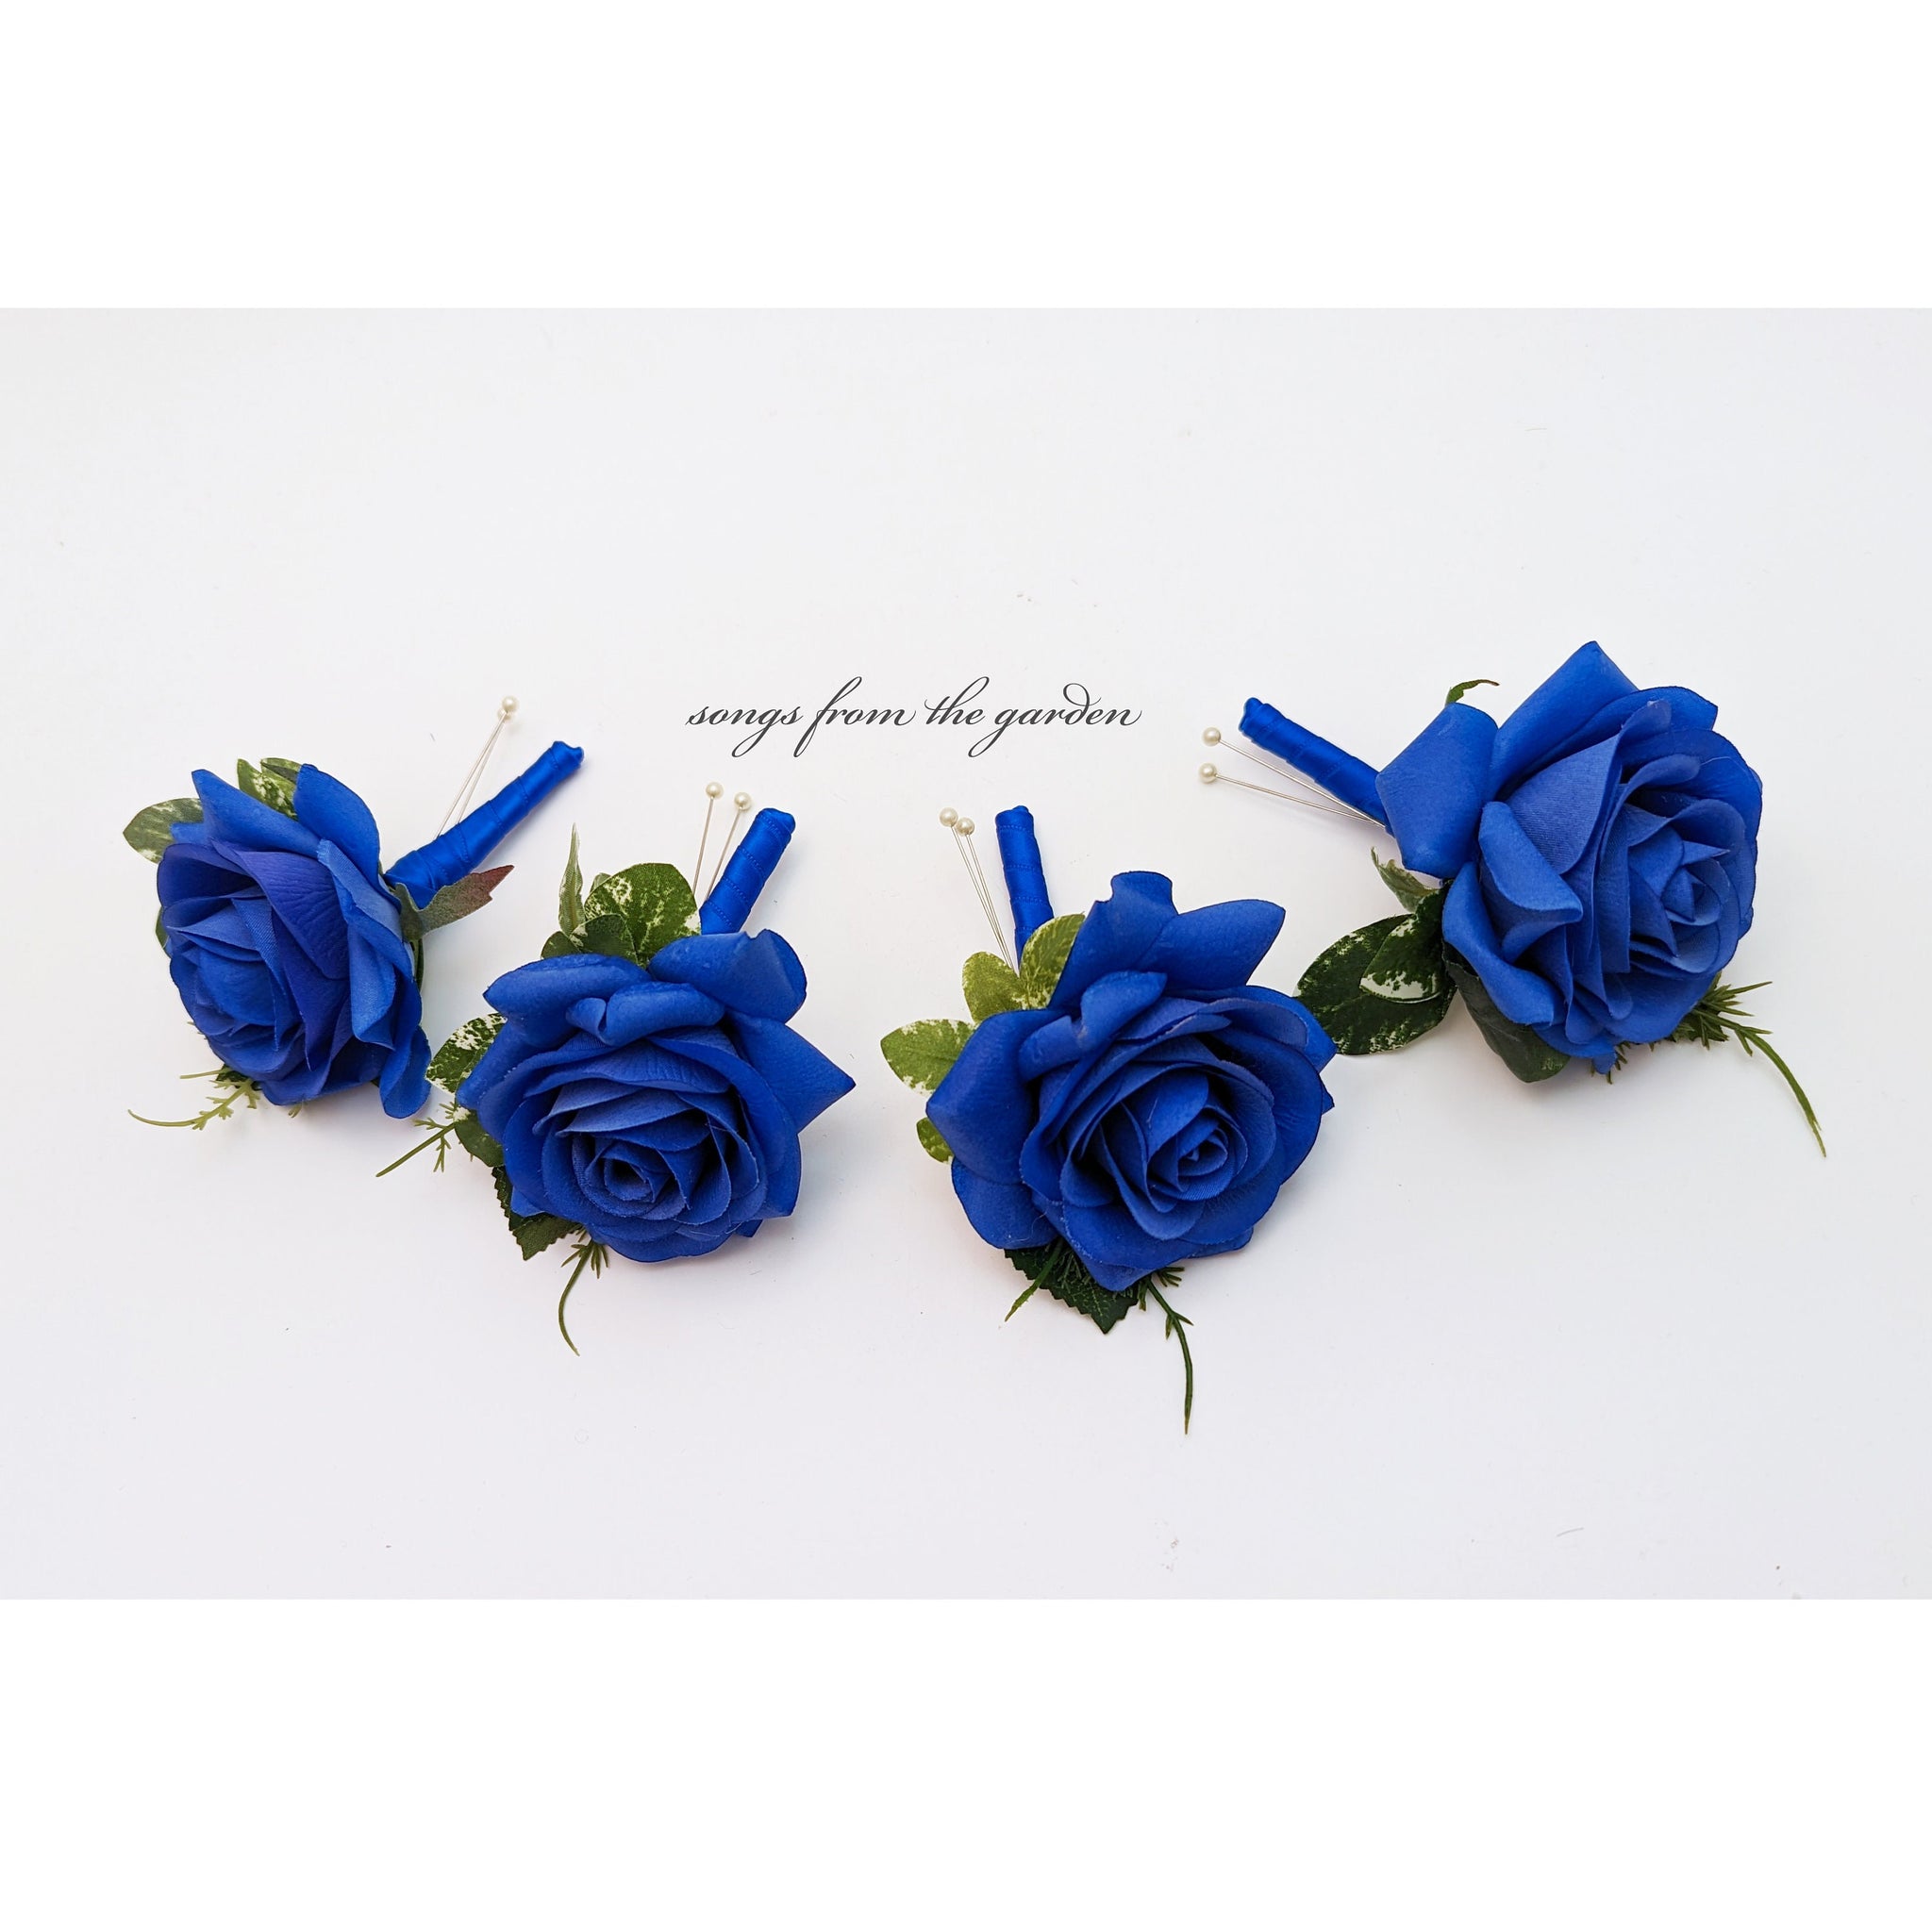 Wrist or Arm Corsage - Royal Blue Rose and Calla Lily Corsage or Boutonniere - Choose Your Ribbon Color - Wedding Homecoming Prom Corsage